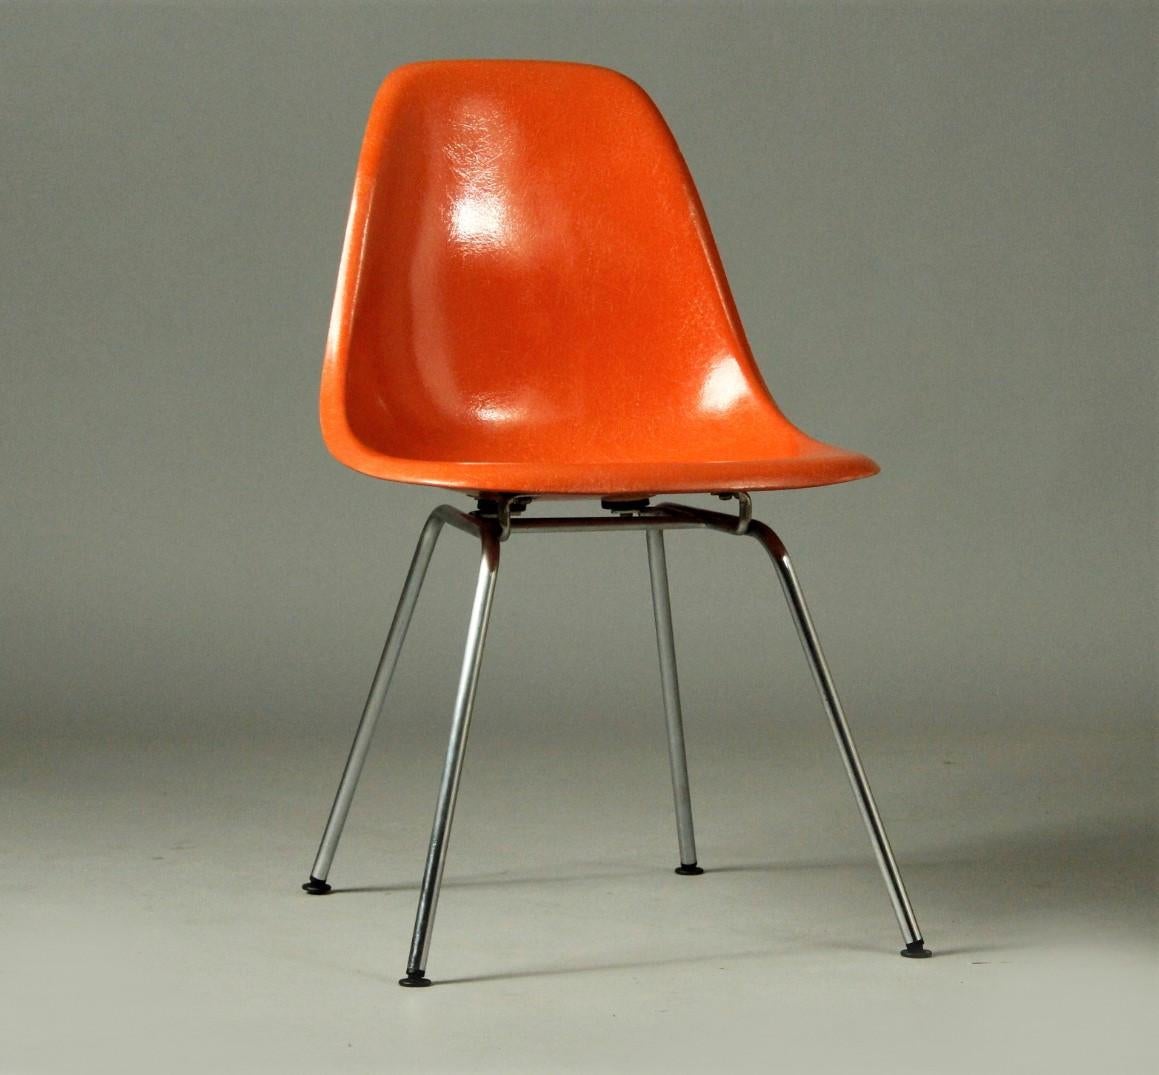 Early Production Set of 4 Fiberglass Chairs by Eames for Herman Miller, 1950s For Sale 3